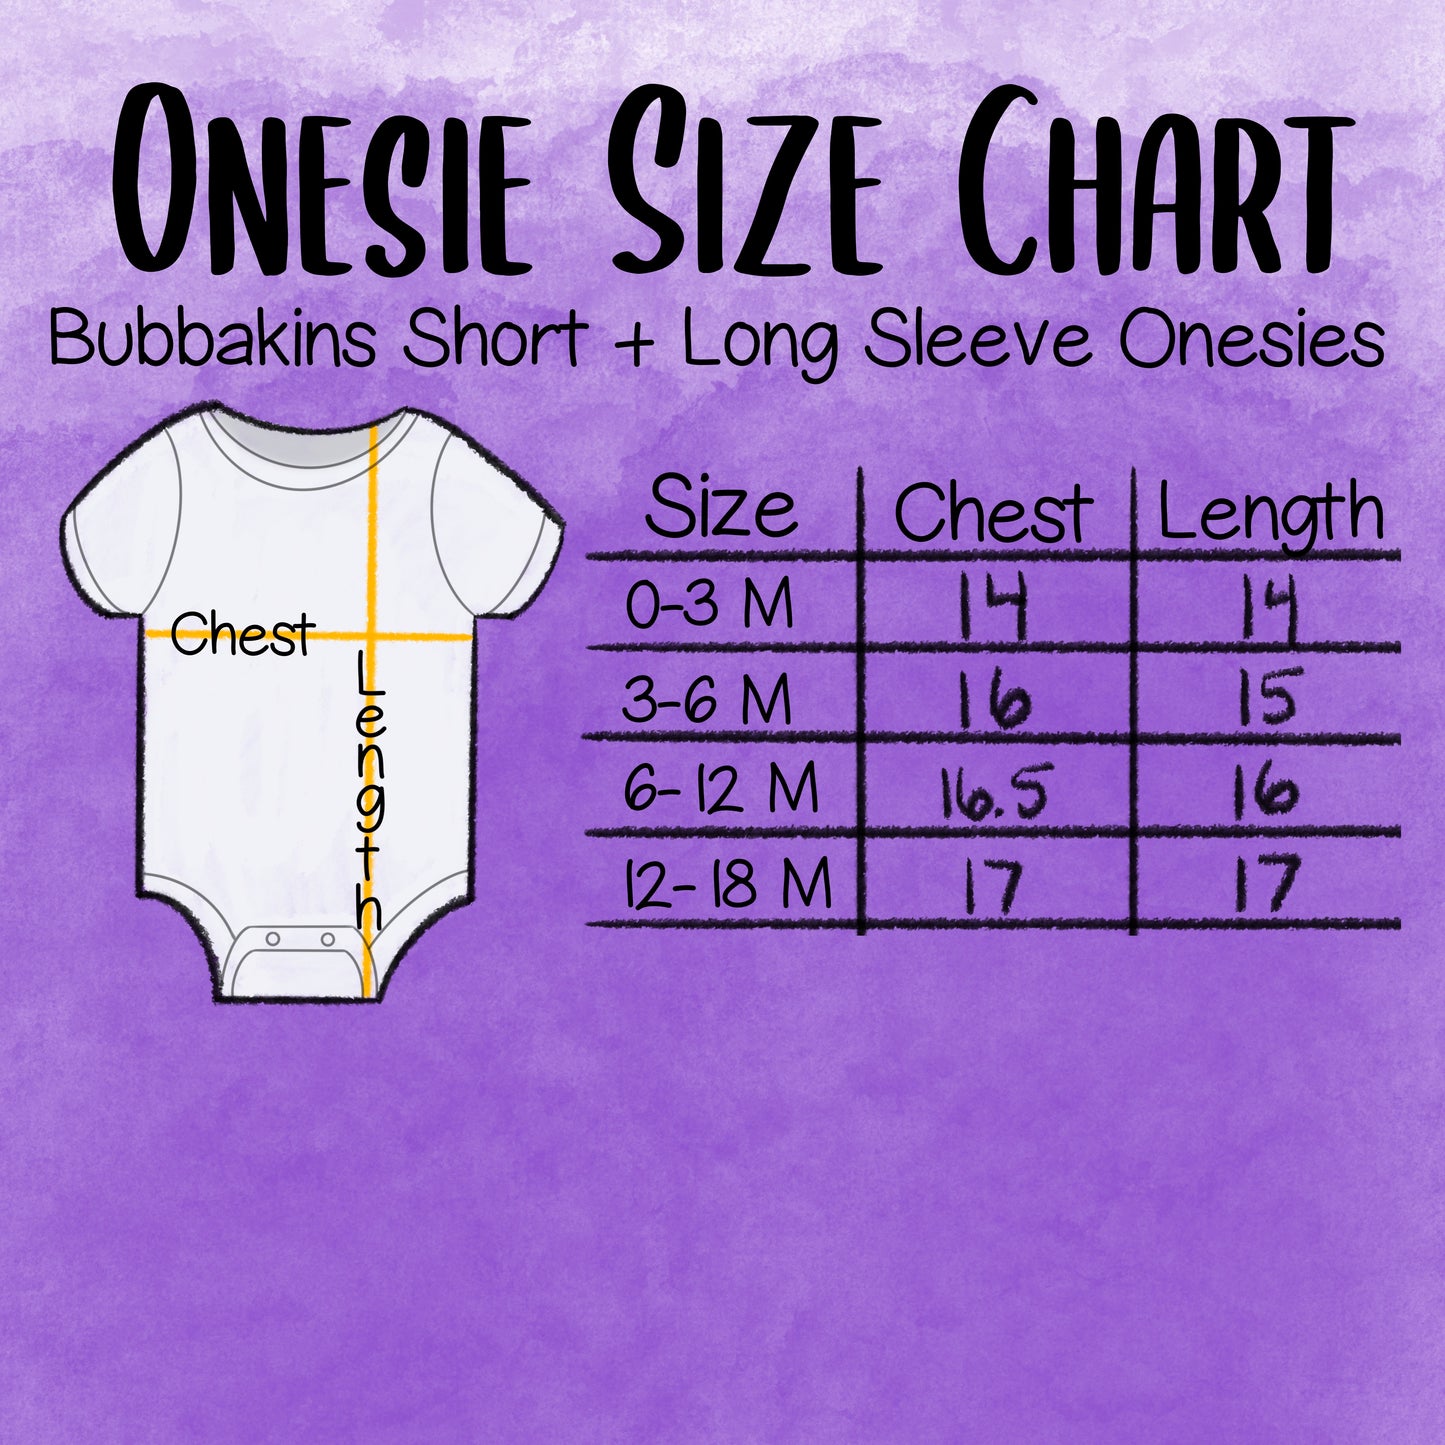 Okay, Janet! | Grannies Shirt | (Coordinates to “Come On, Rita! Shirt) Bluey Inspired Shirt | Sisters Shirts | Besties Matching Shirt | Family Matching Shirts | Sizes For Babies To Adults